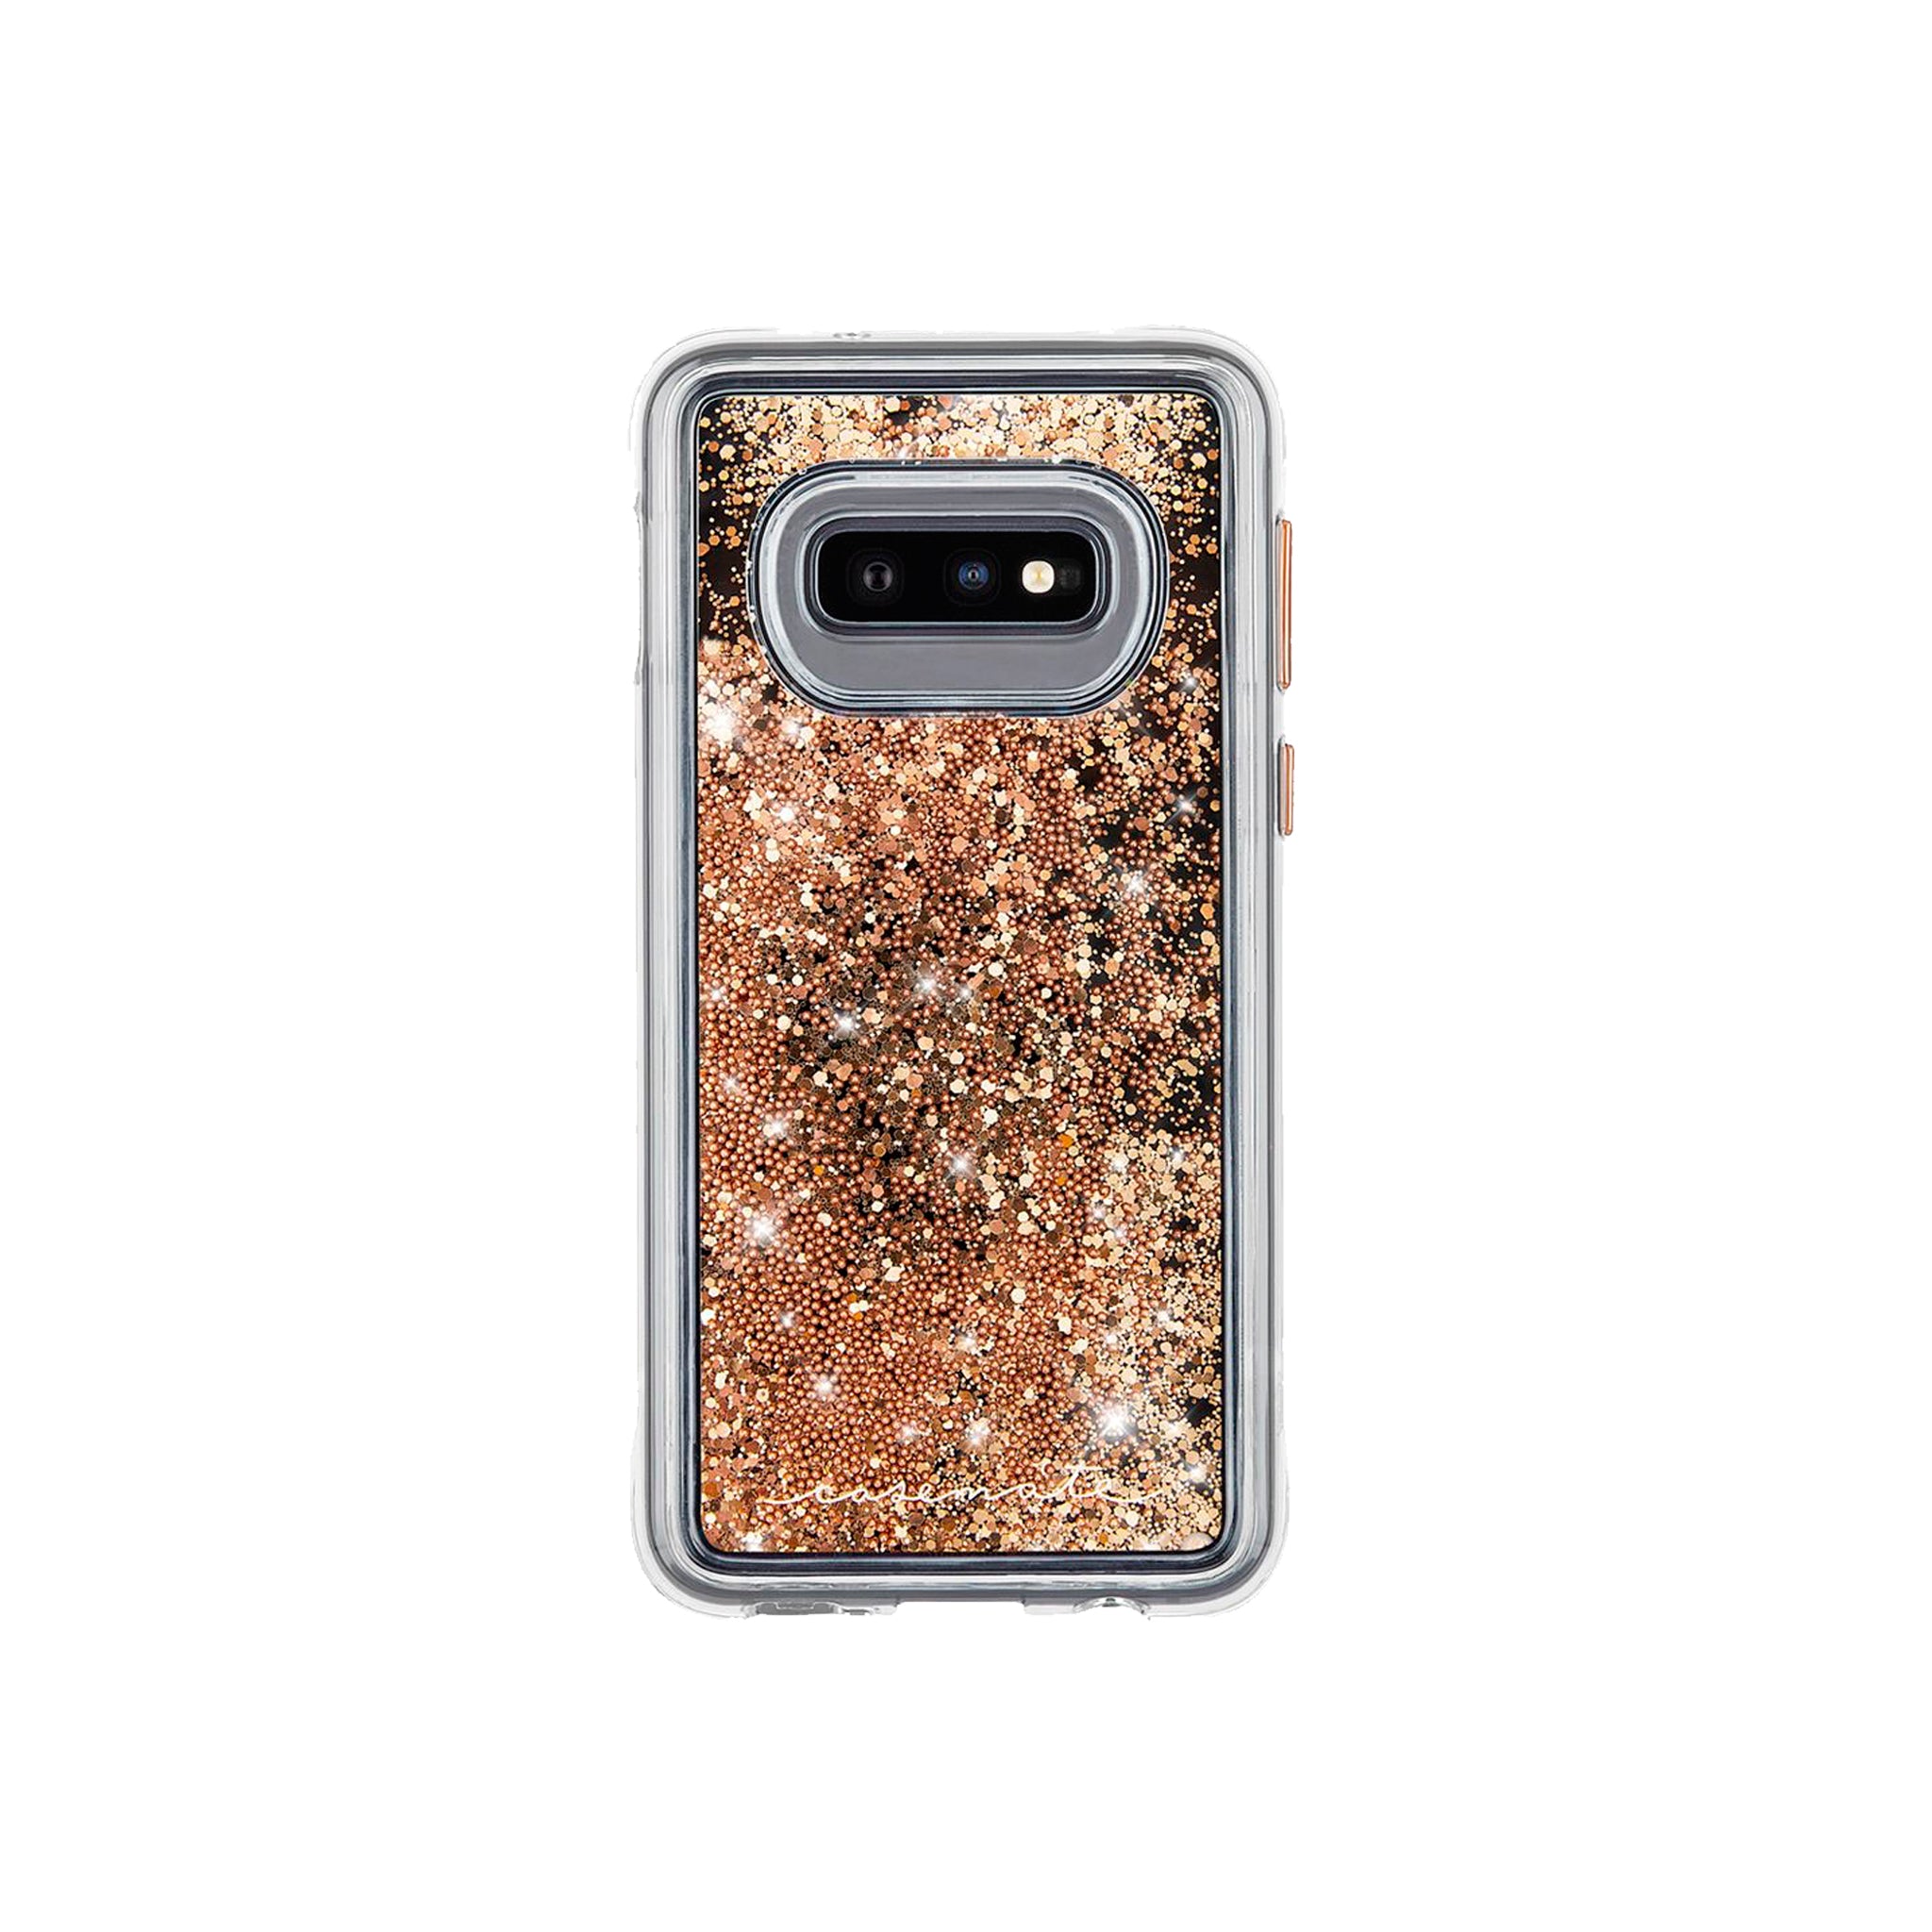 Case-mate - Waterfall Case For Samsung Galaxy S10e - Gold